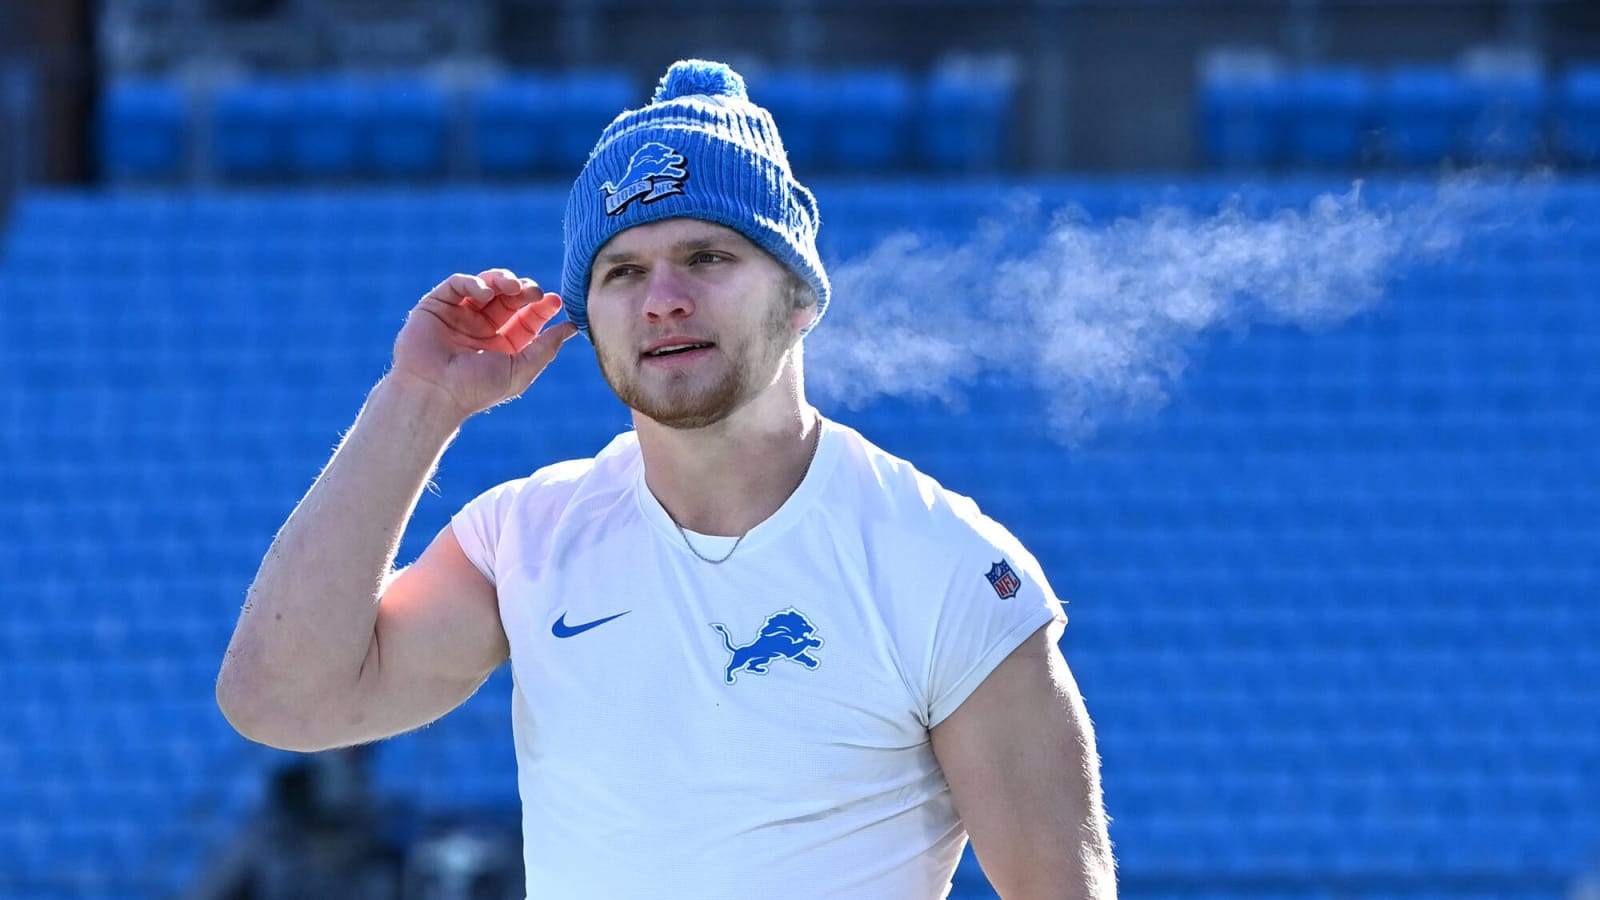 Lions rookie DE Aidan Hutchinson makes NFL history in win over Bears